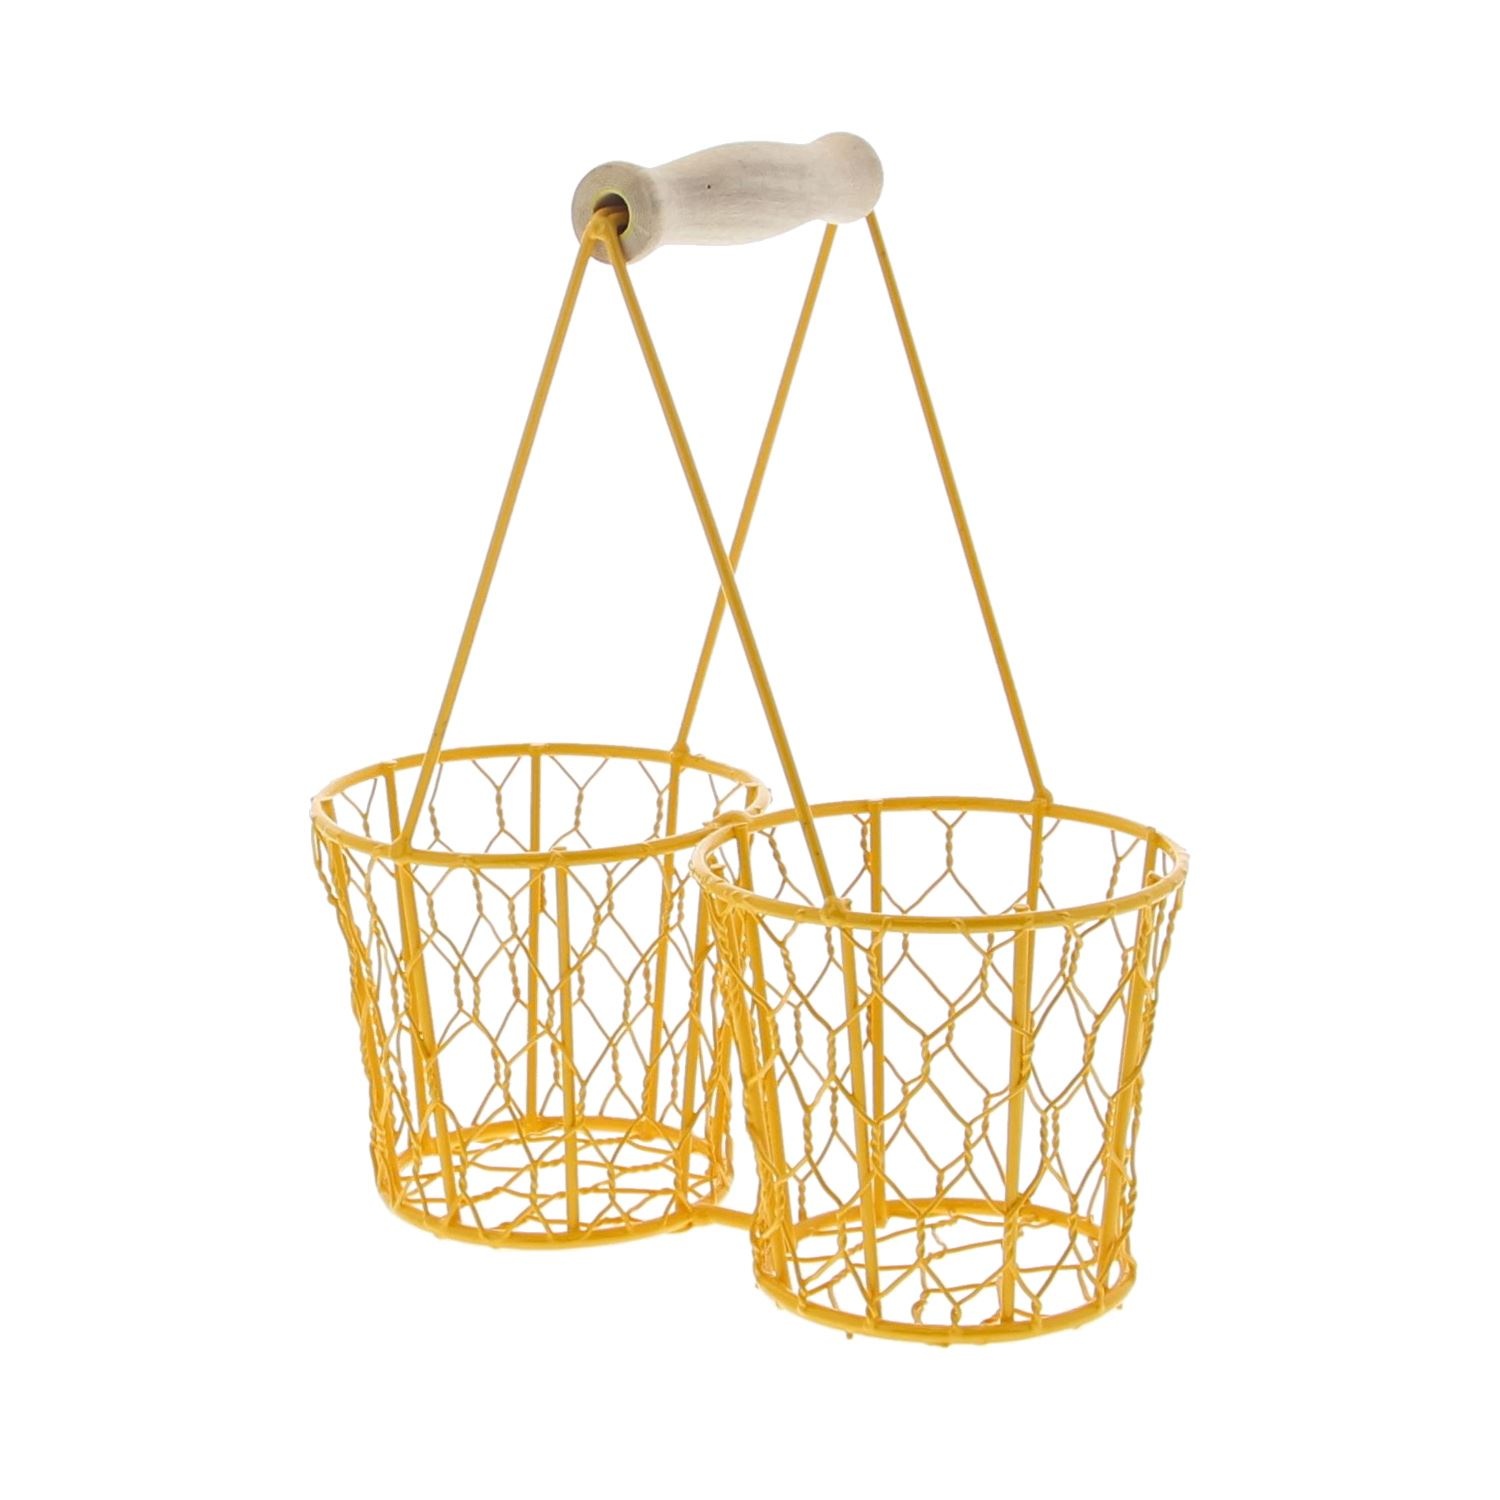 Basket wire double with handle yellow - 4 pieces